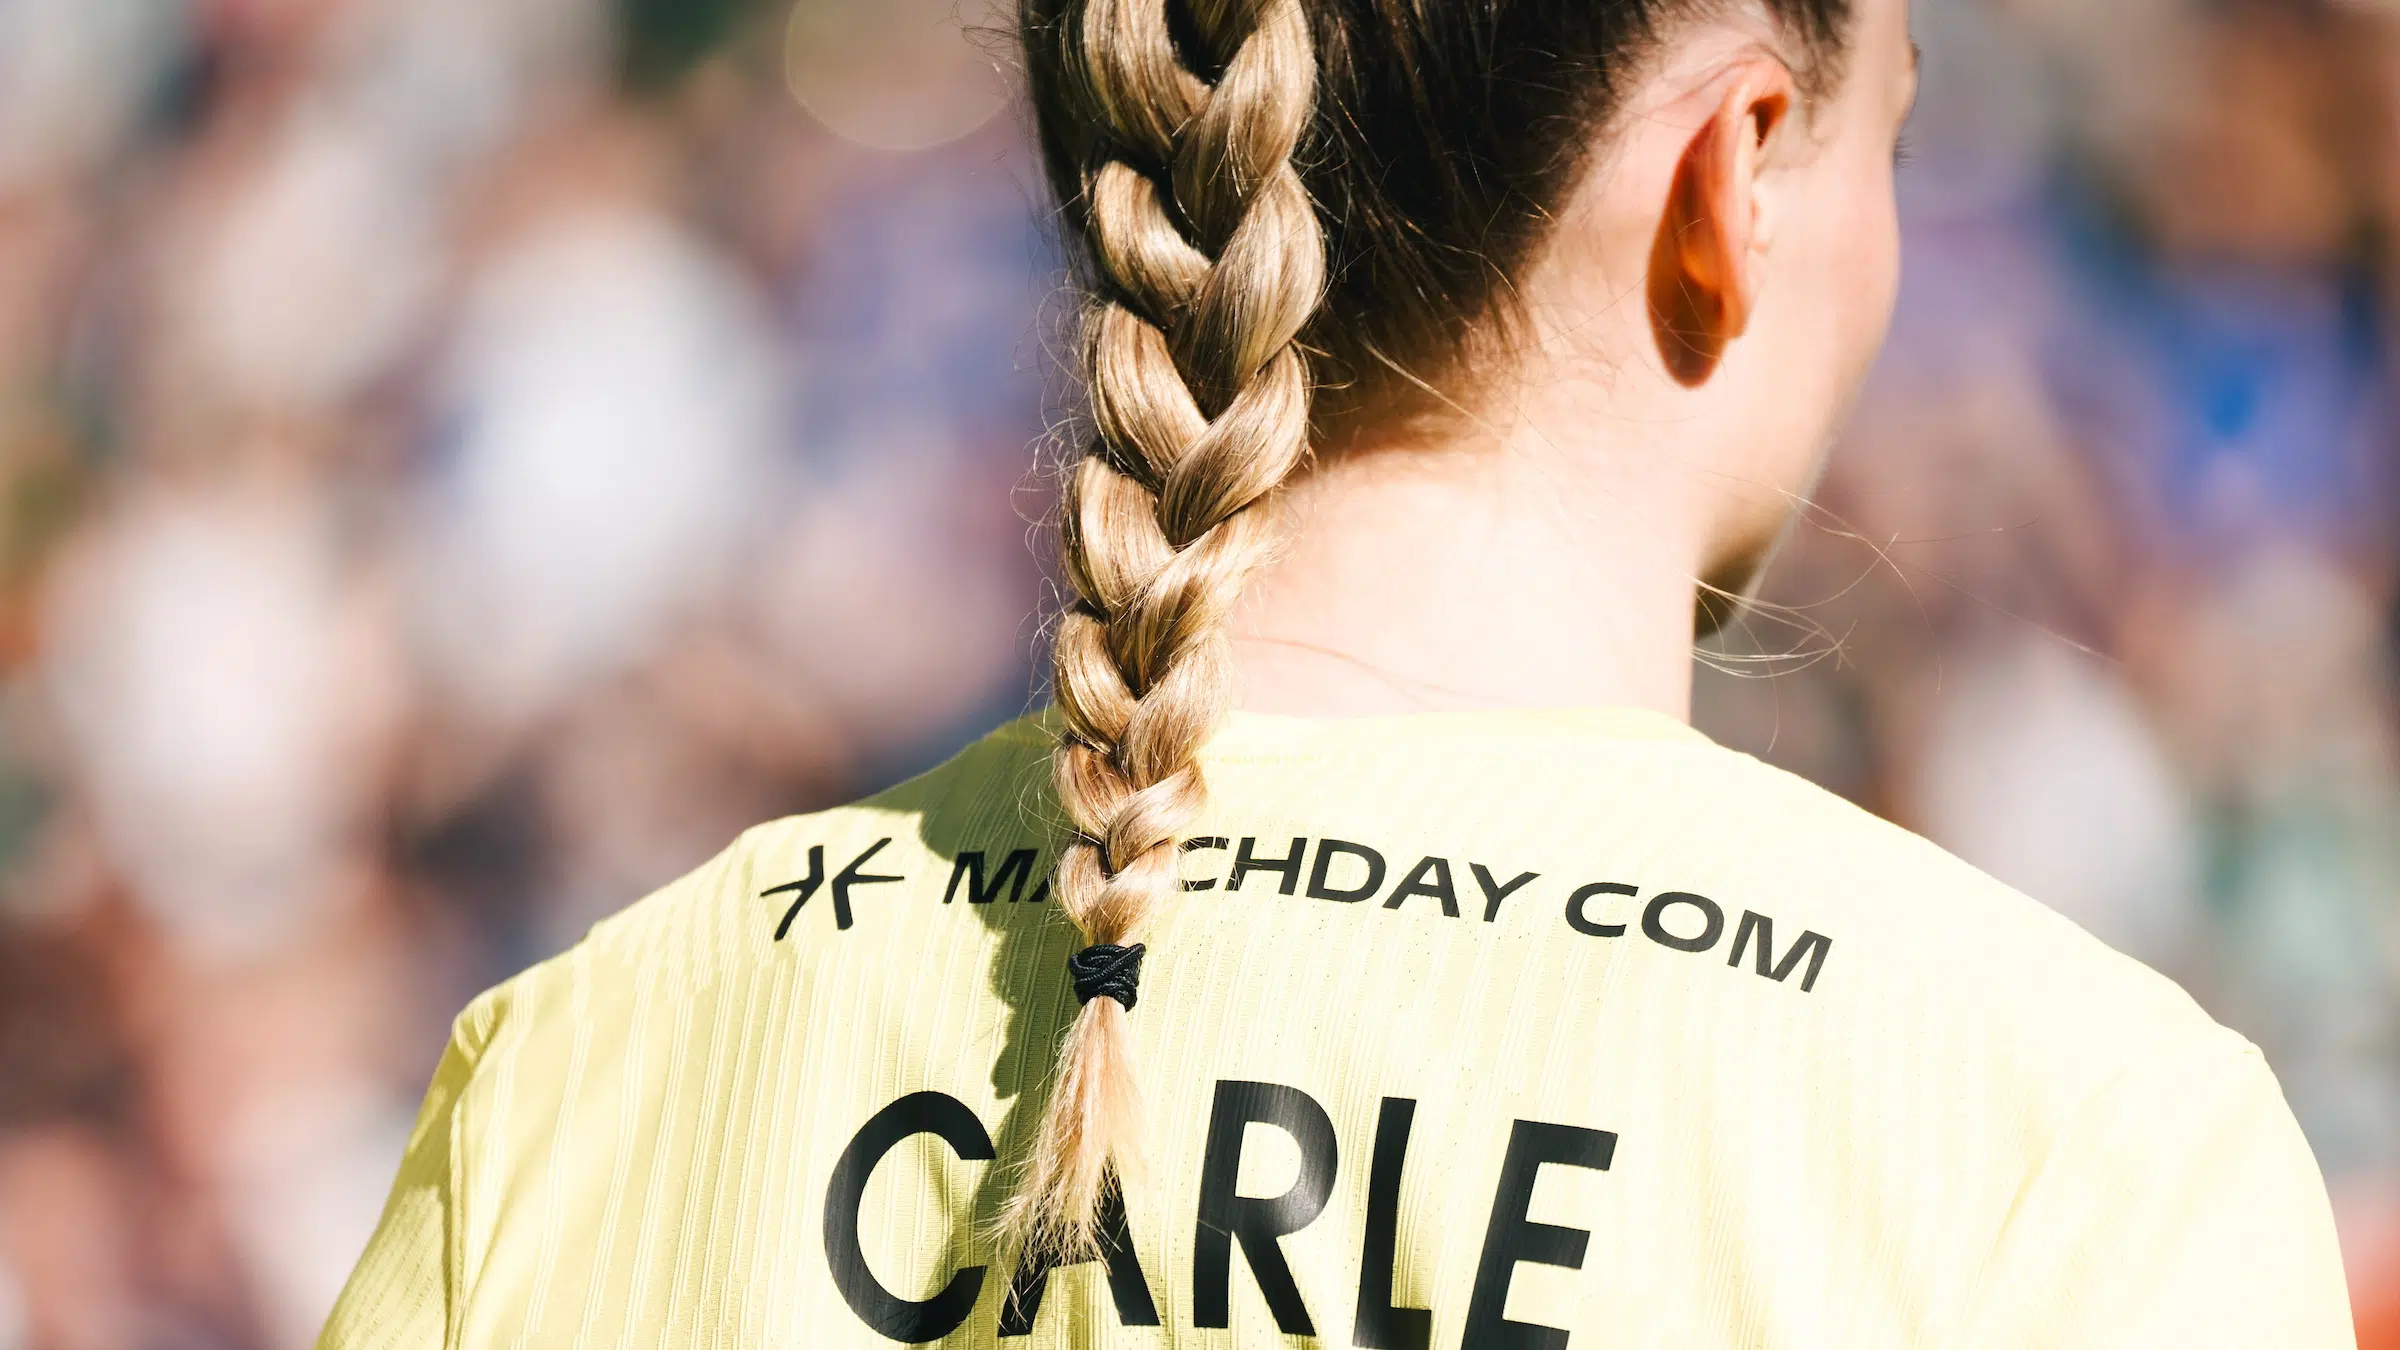 The back of Gabby Carle in a yellow Spirit jersey with her last name CARLE across the back. Her blonde braid falls over the name.